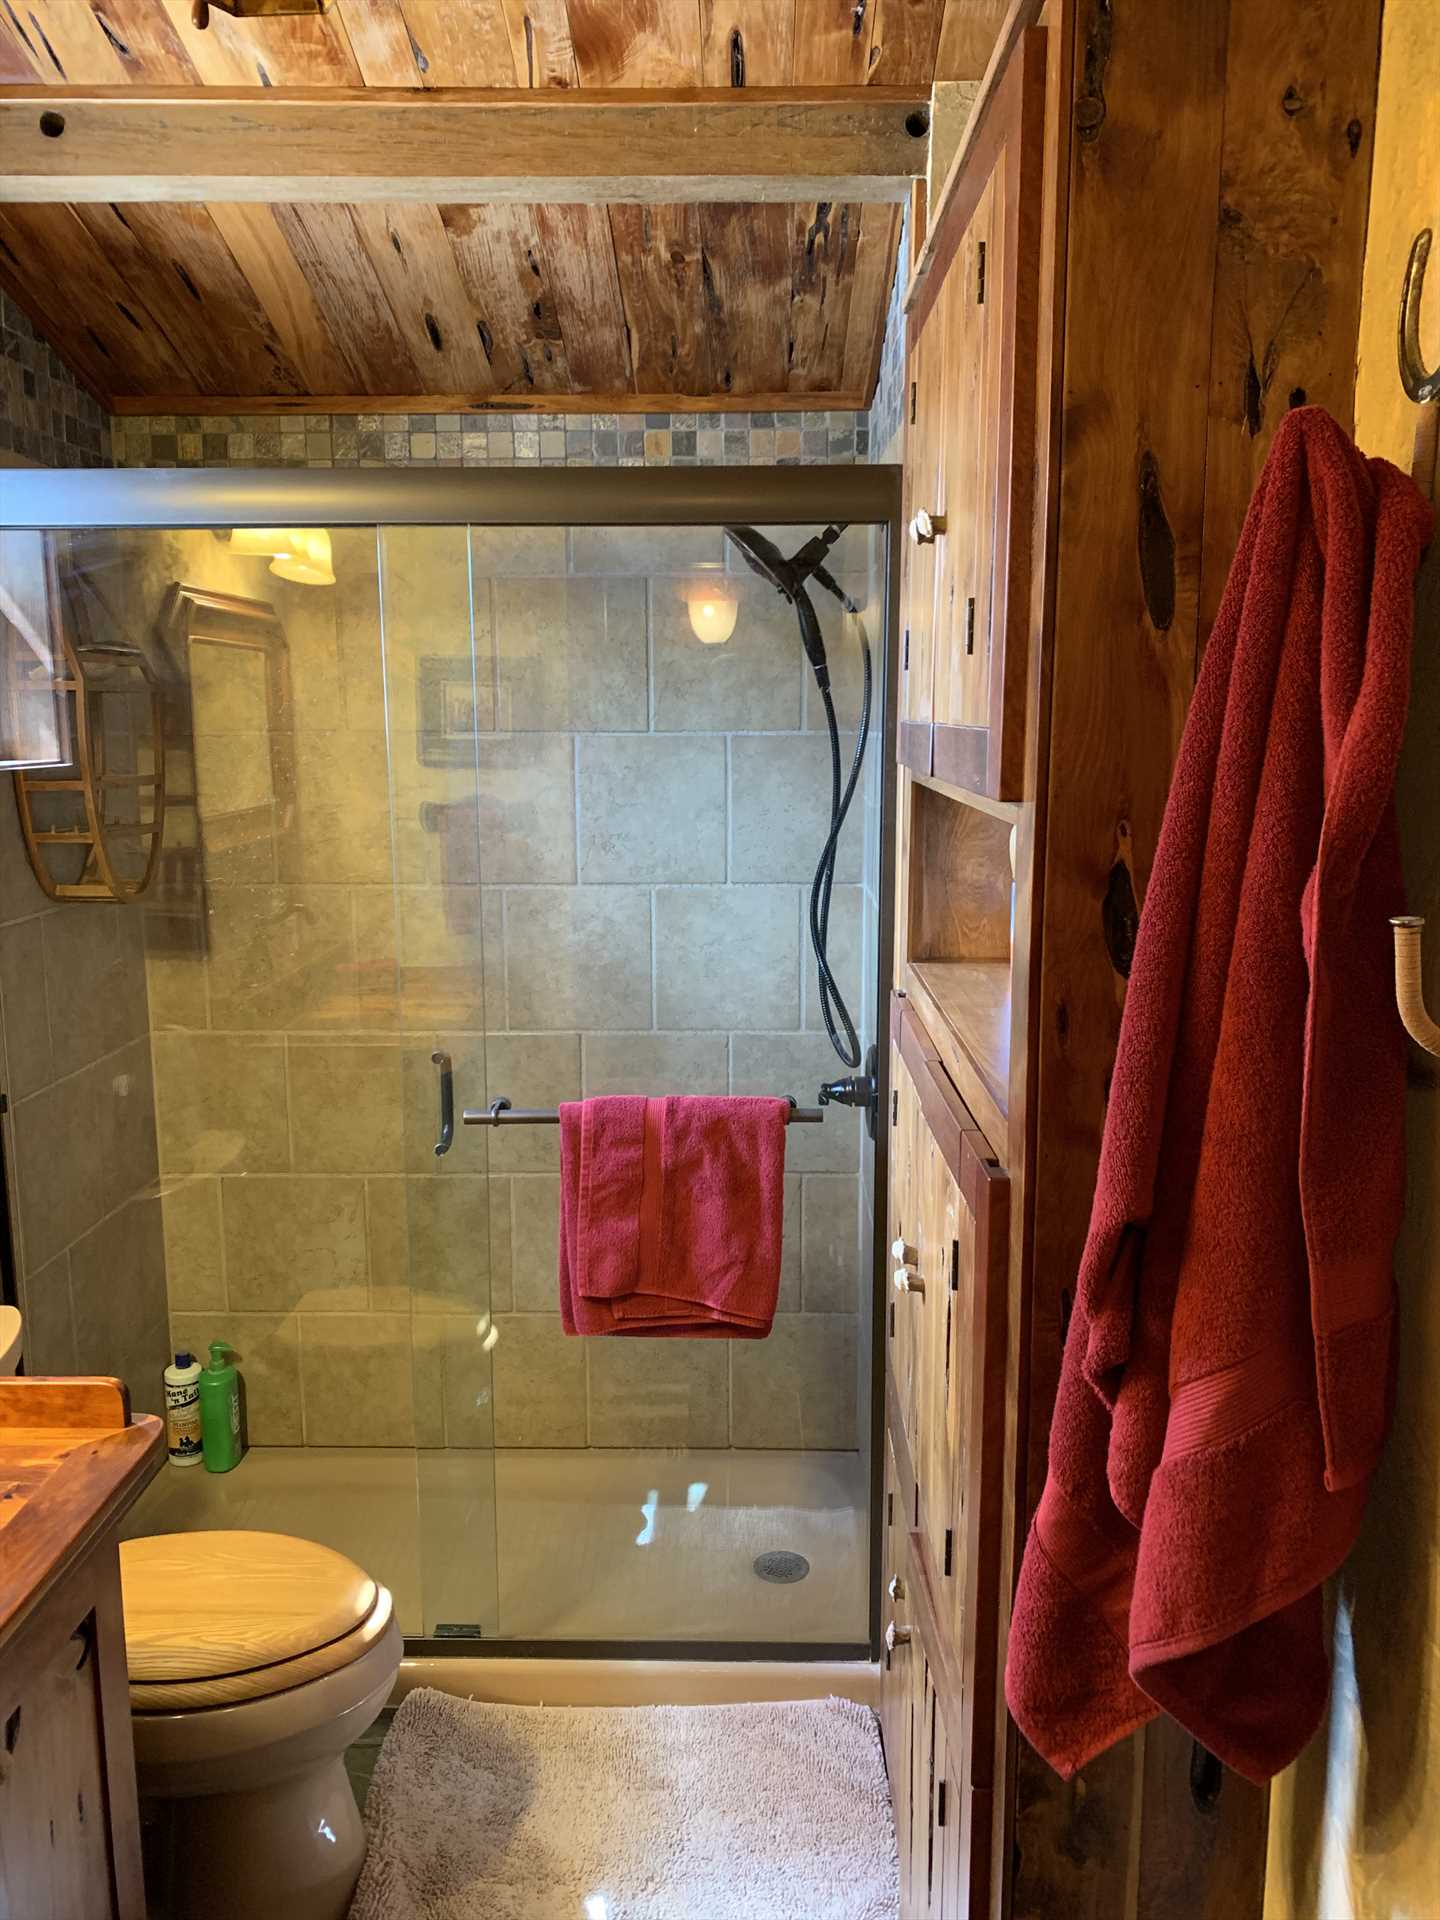                                                 The warm, wood-highlighted theme of the cabin continues in the full bath, which ix kept neat as a pin.